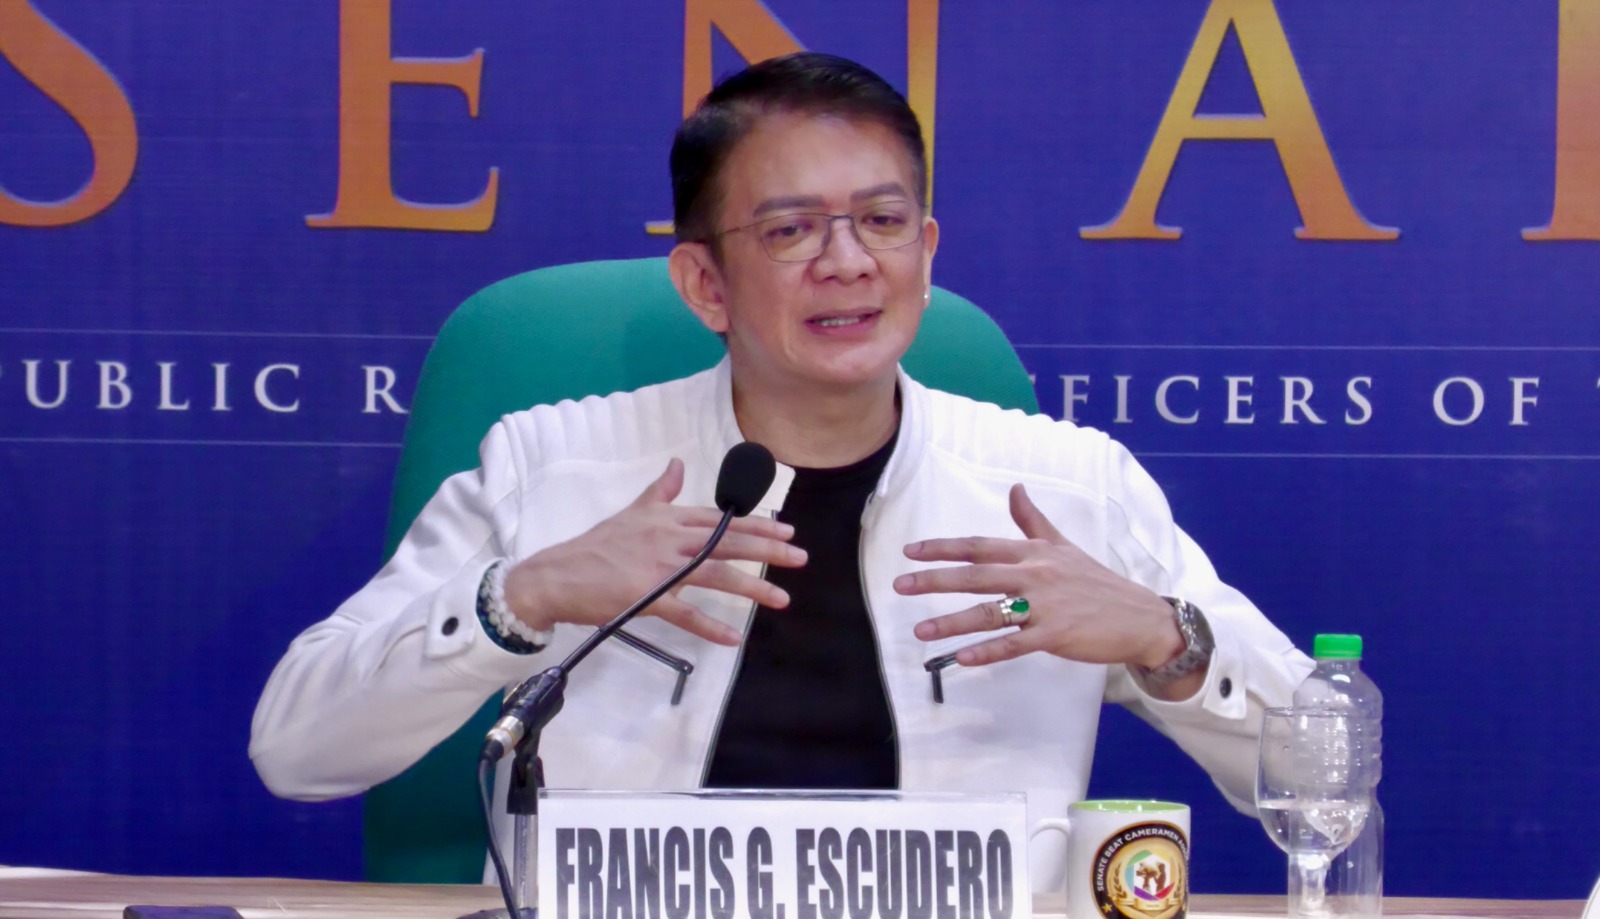 Escudero welcomes trust rating survey results